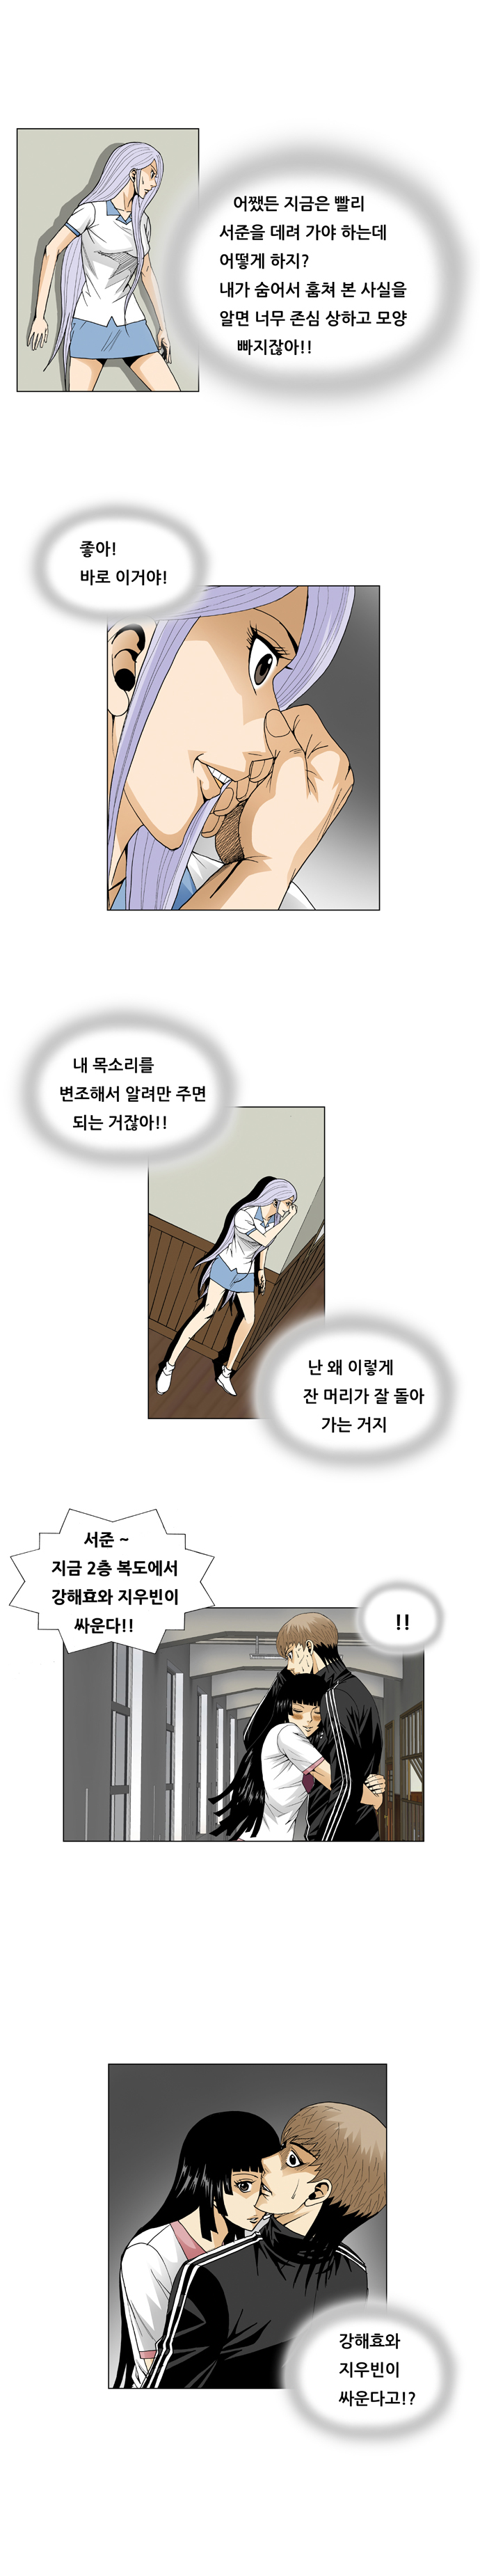 Ultimate Legend - Kang Hae Hyo - Chapter 56 - Page 3